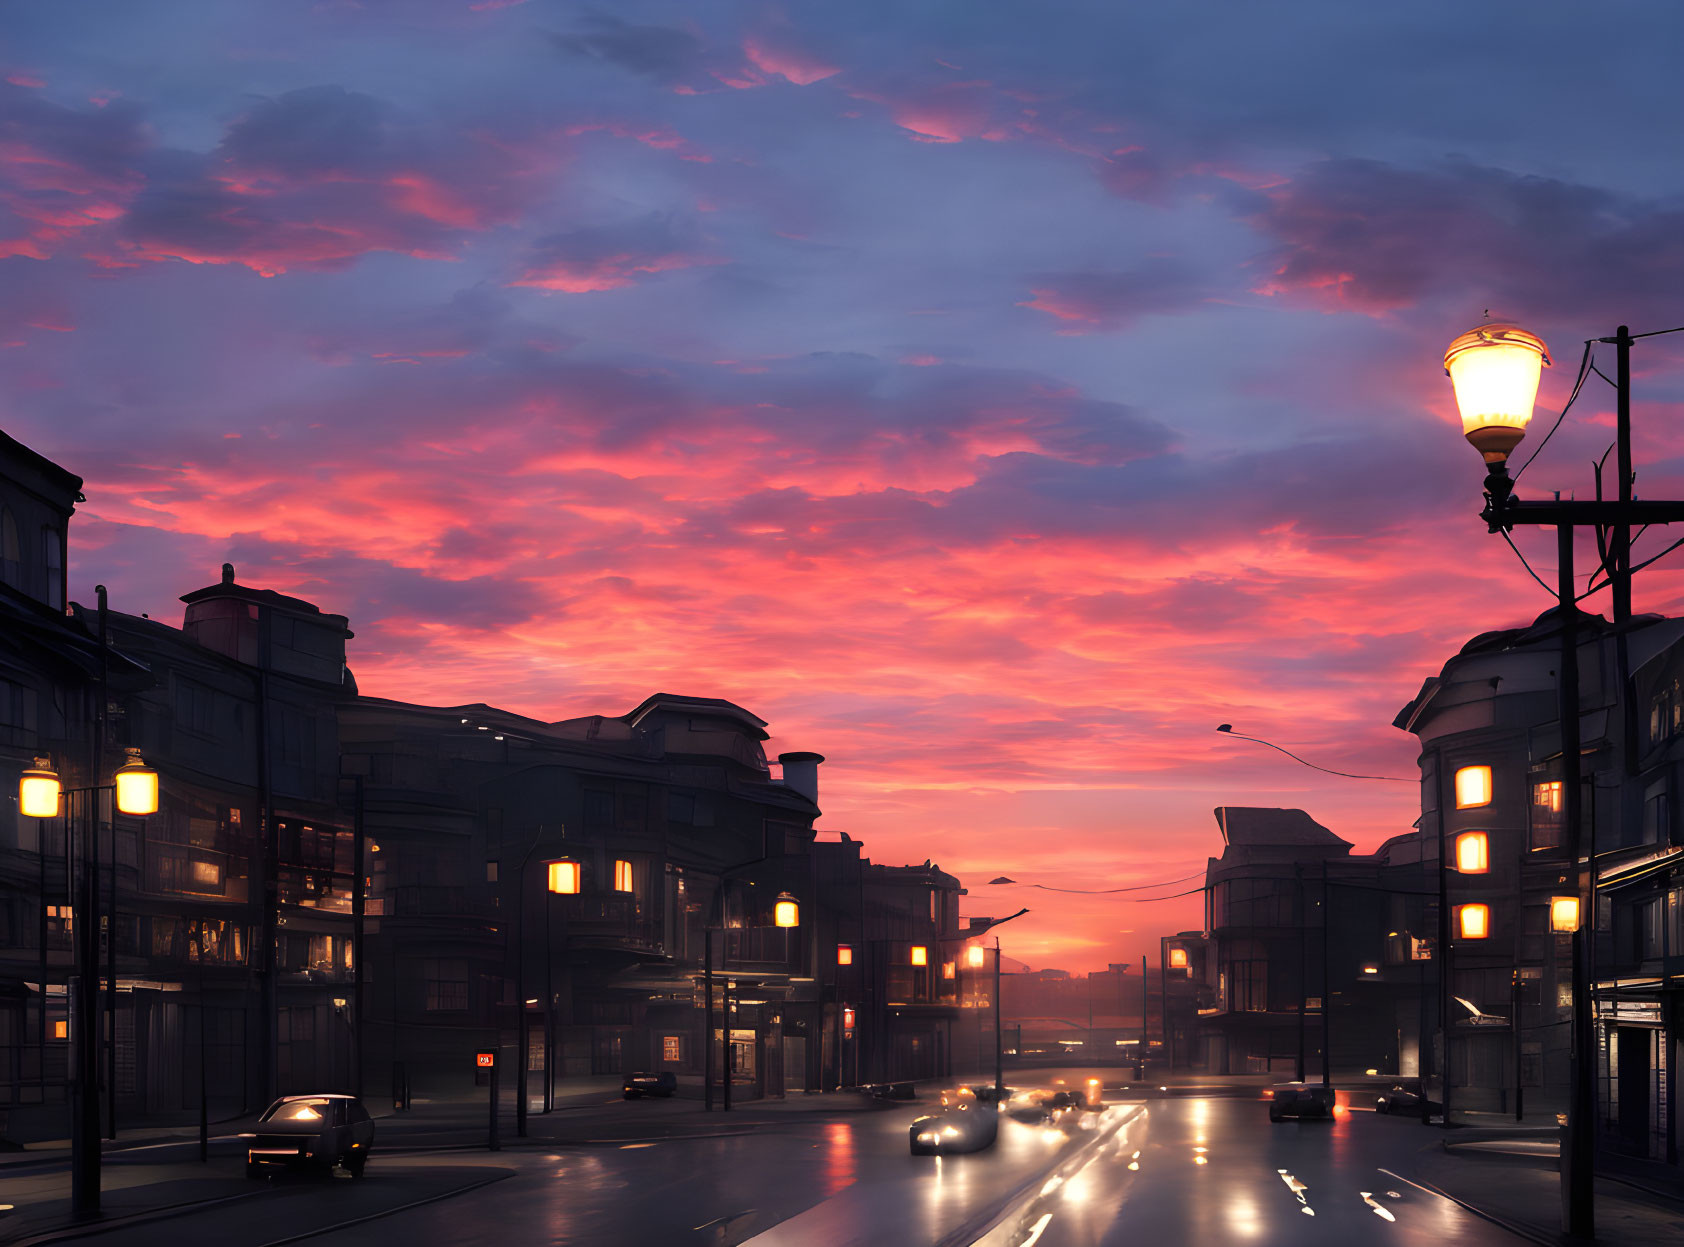 City street at dusk with glowing street lamps and car headlights under pink and orange sky